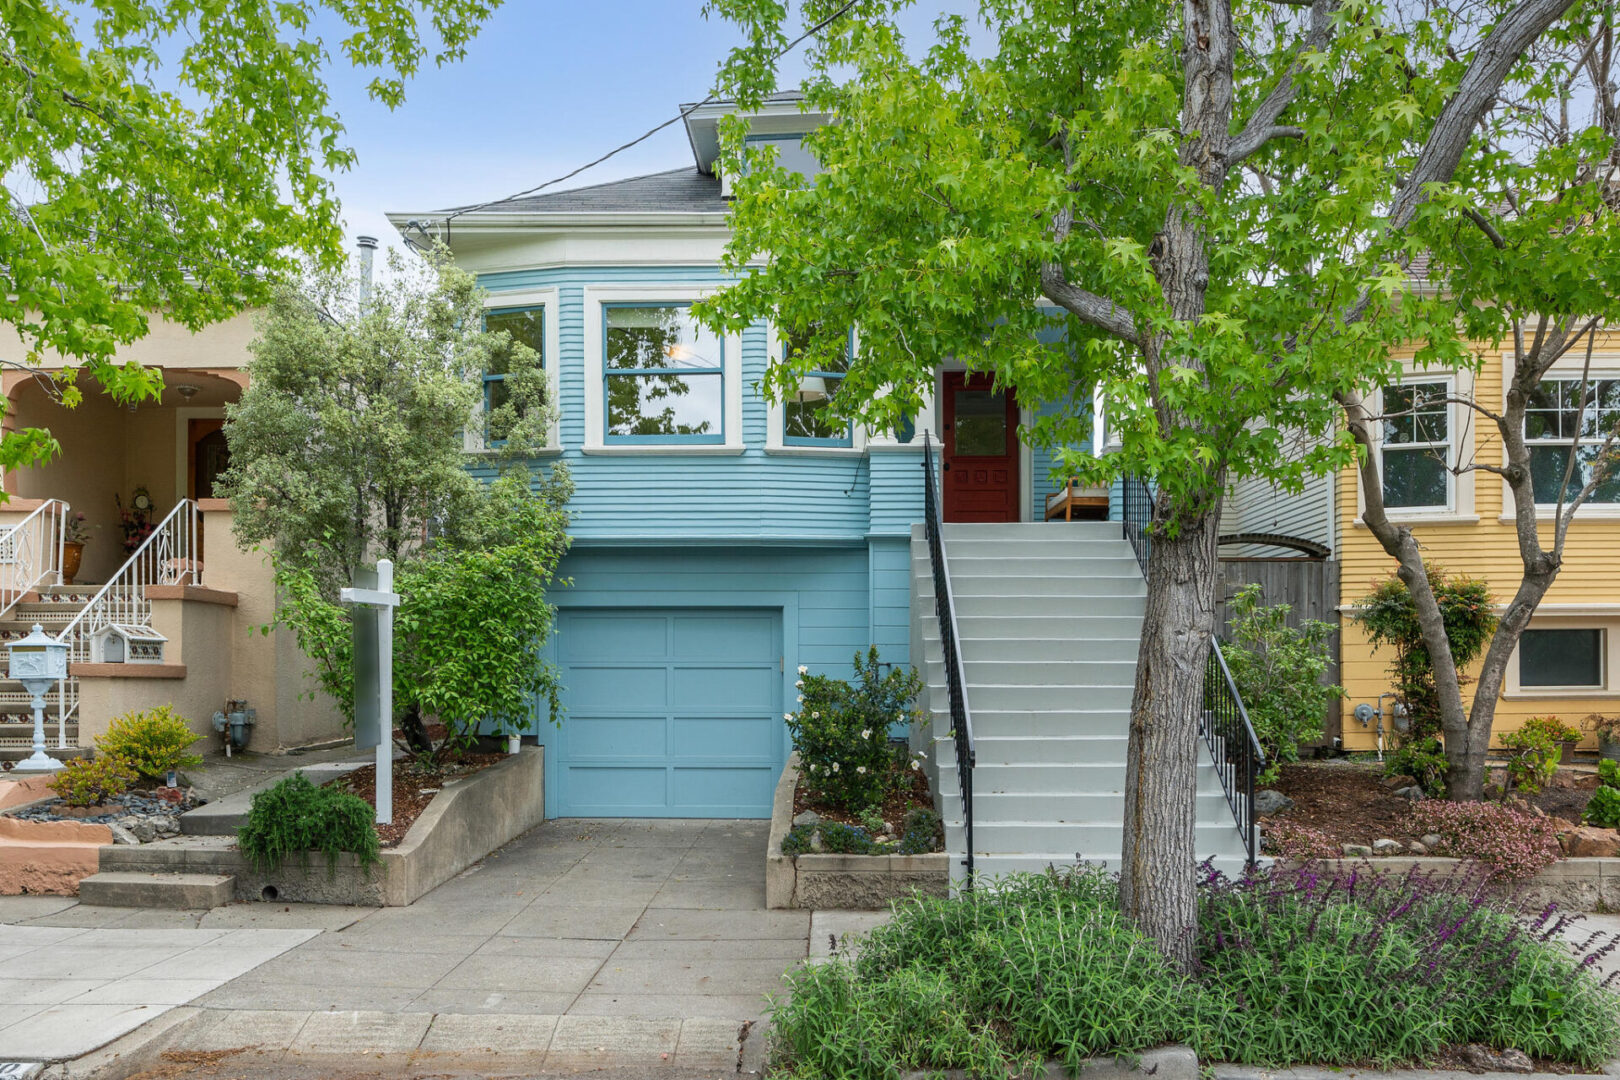 A blue house with steps leading to the front door.